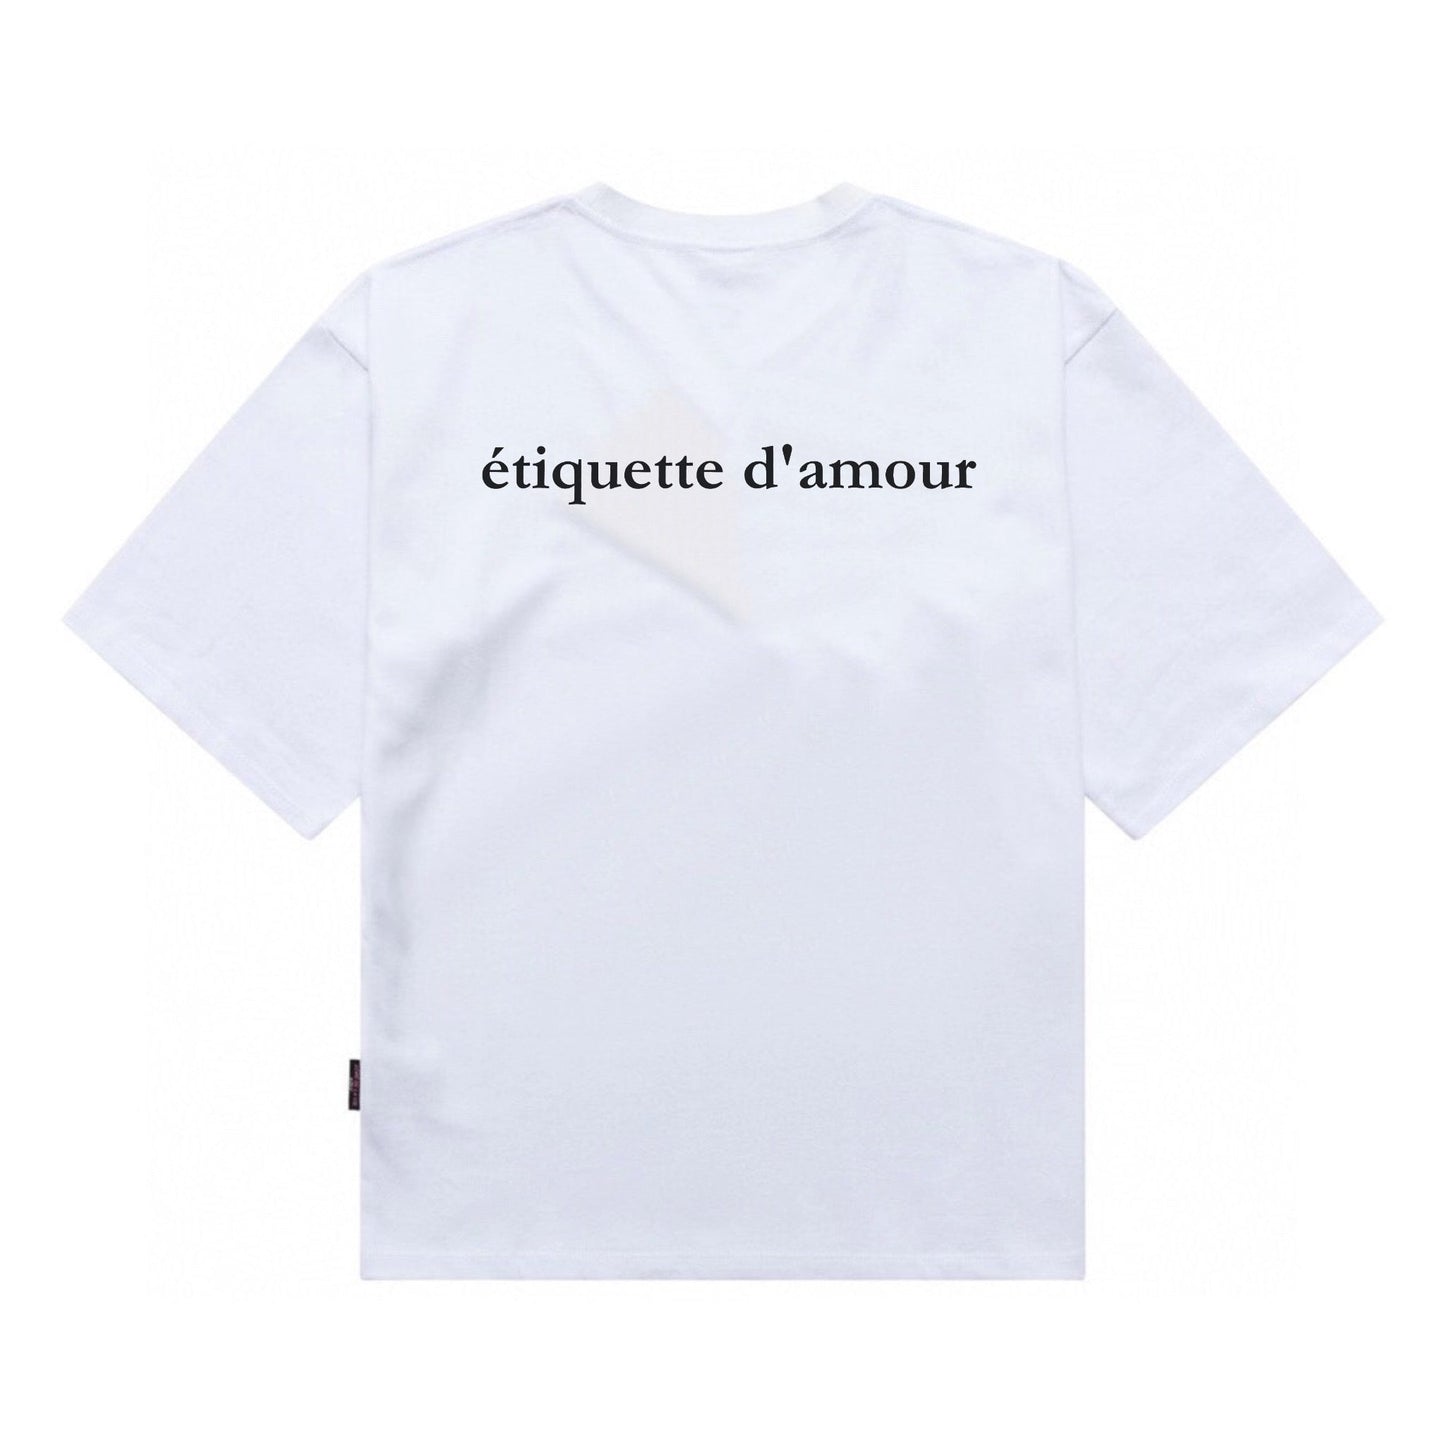 Etiquette Oversized T-Shirt - [0100] Electric Shock X-Ray